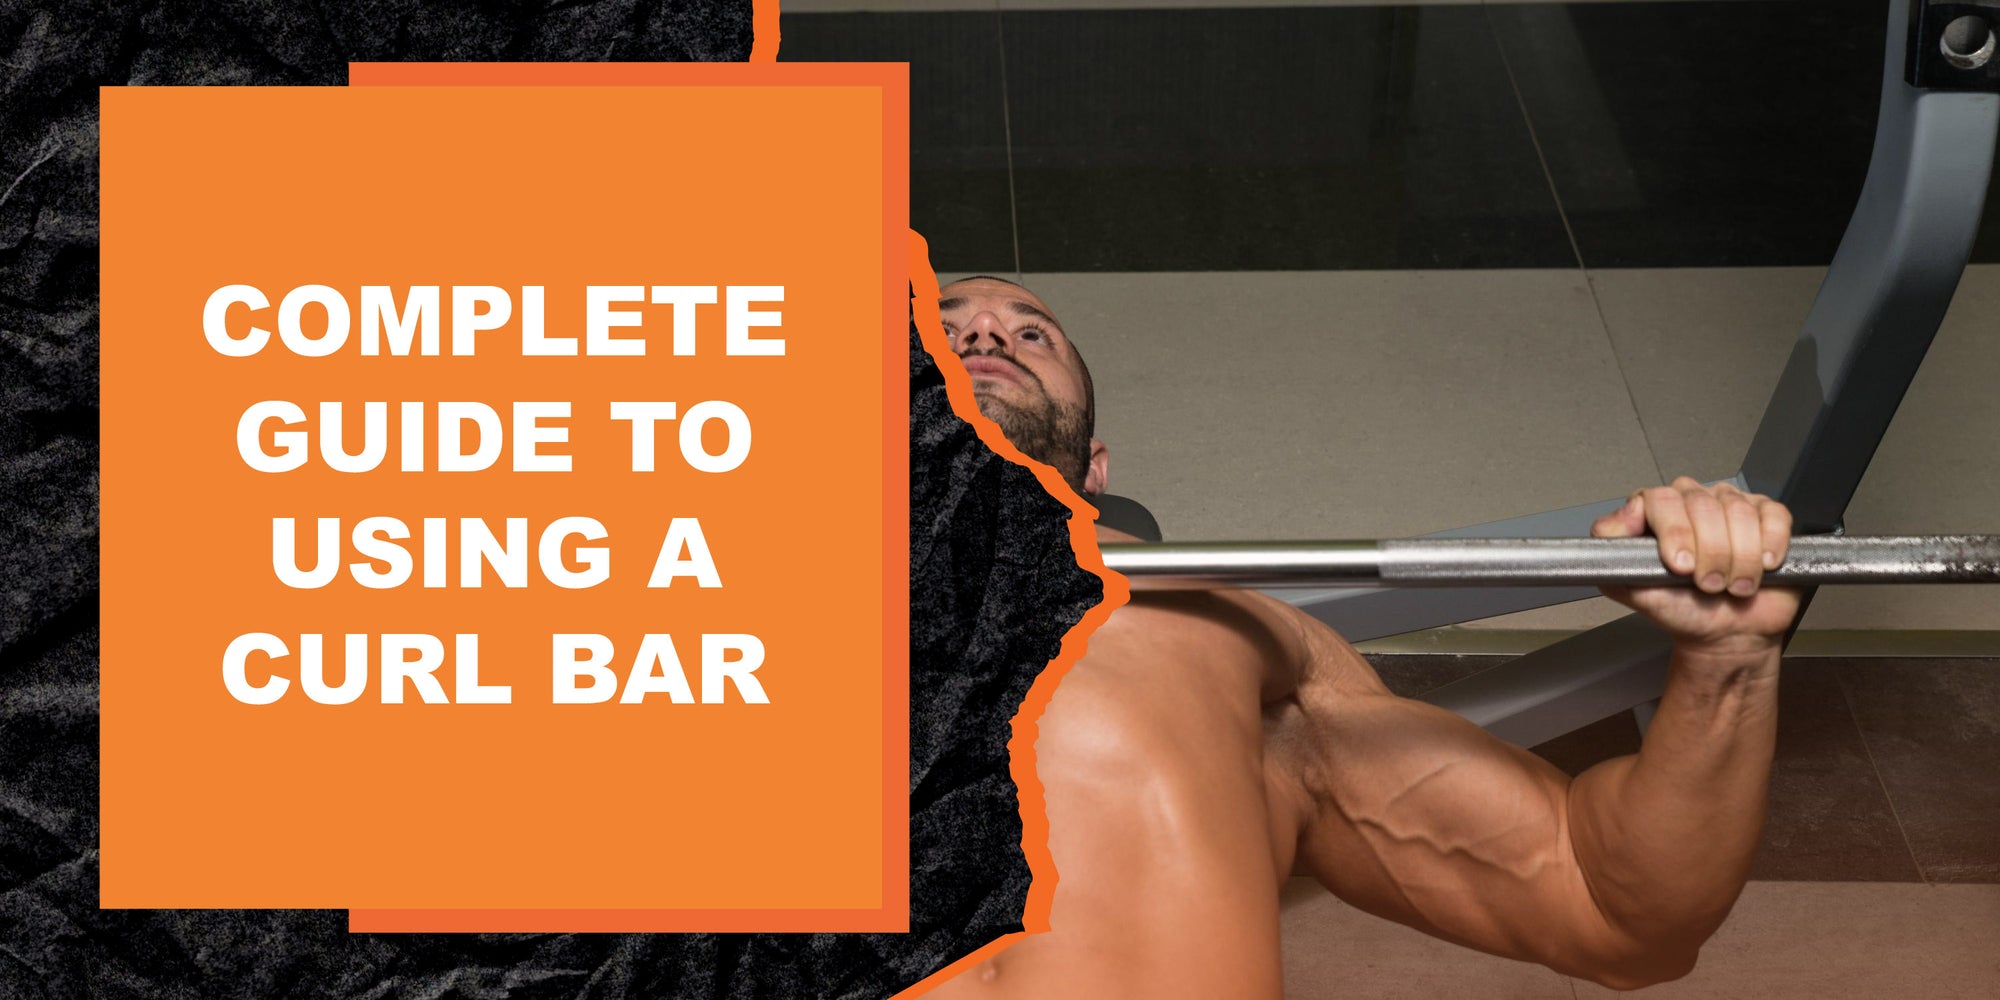 Complete Guide to Using a Curl Bar